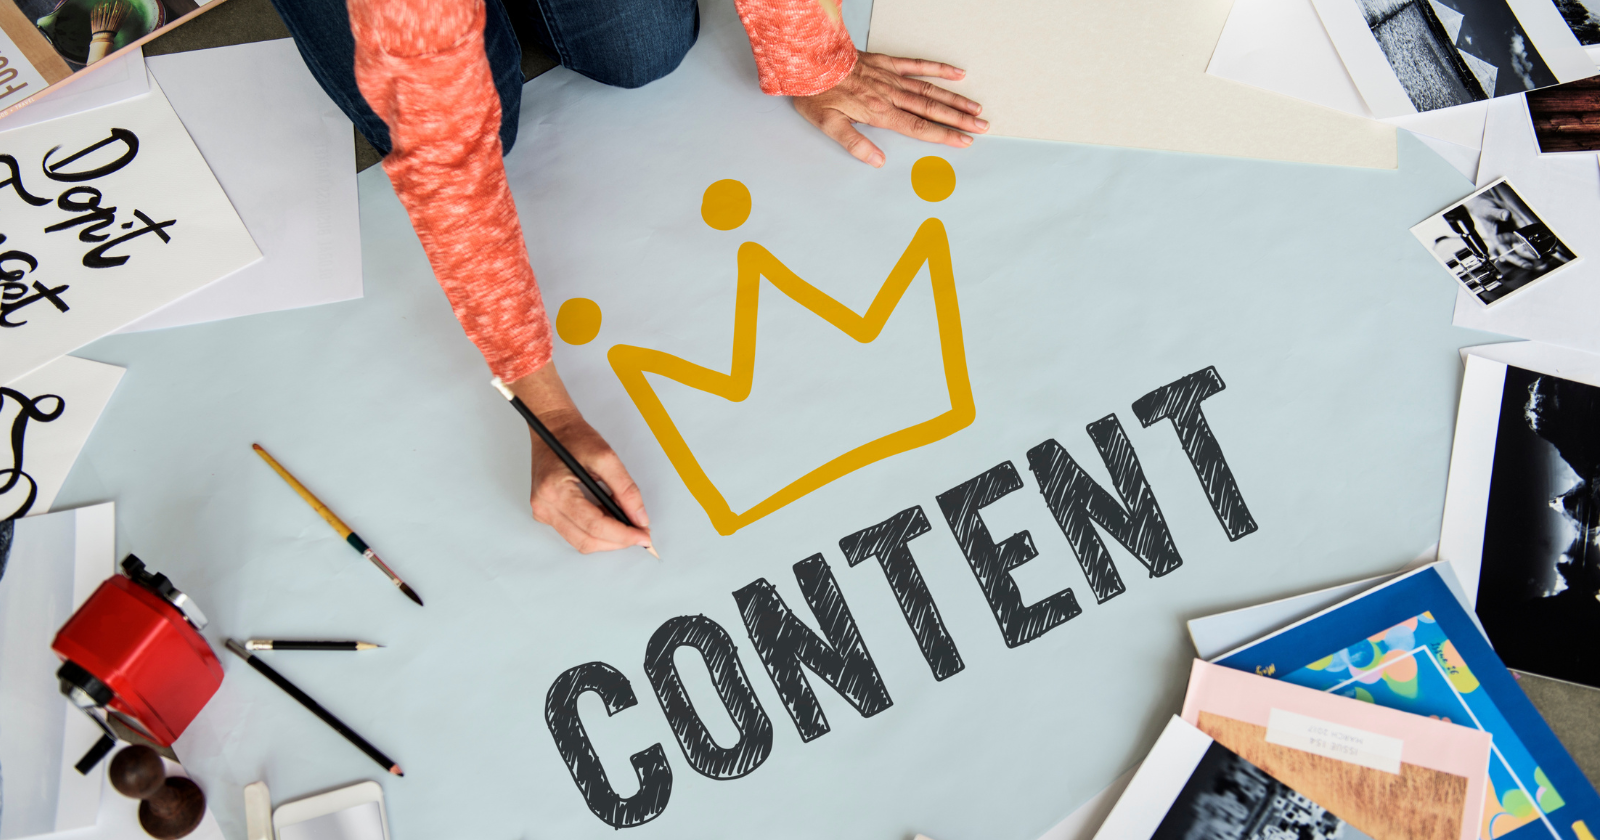 How to Add More Context to Your Social Media Content